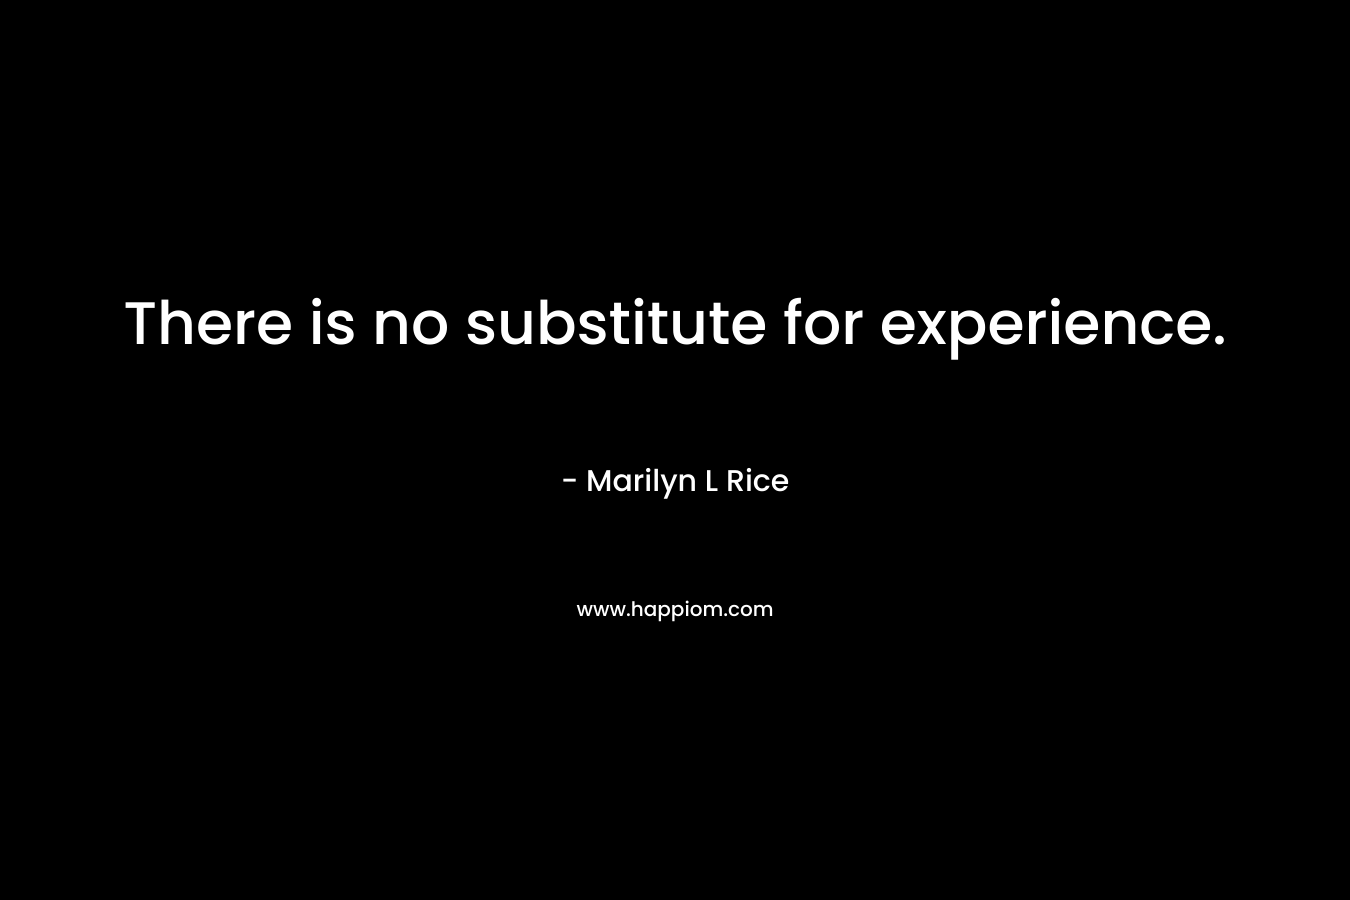 There is no substitute for experience.